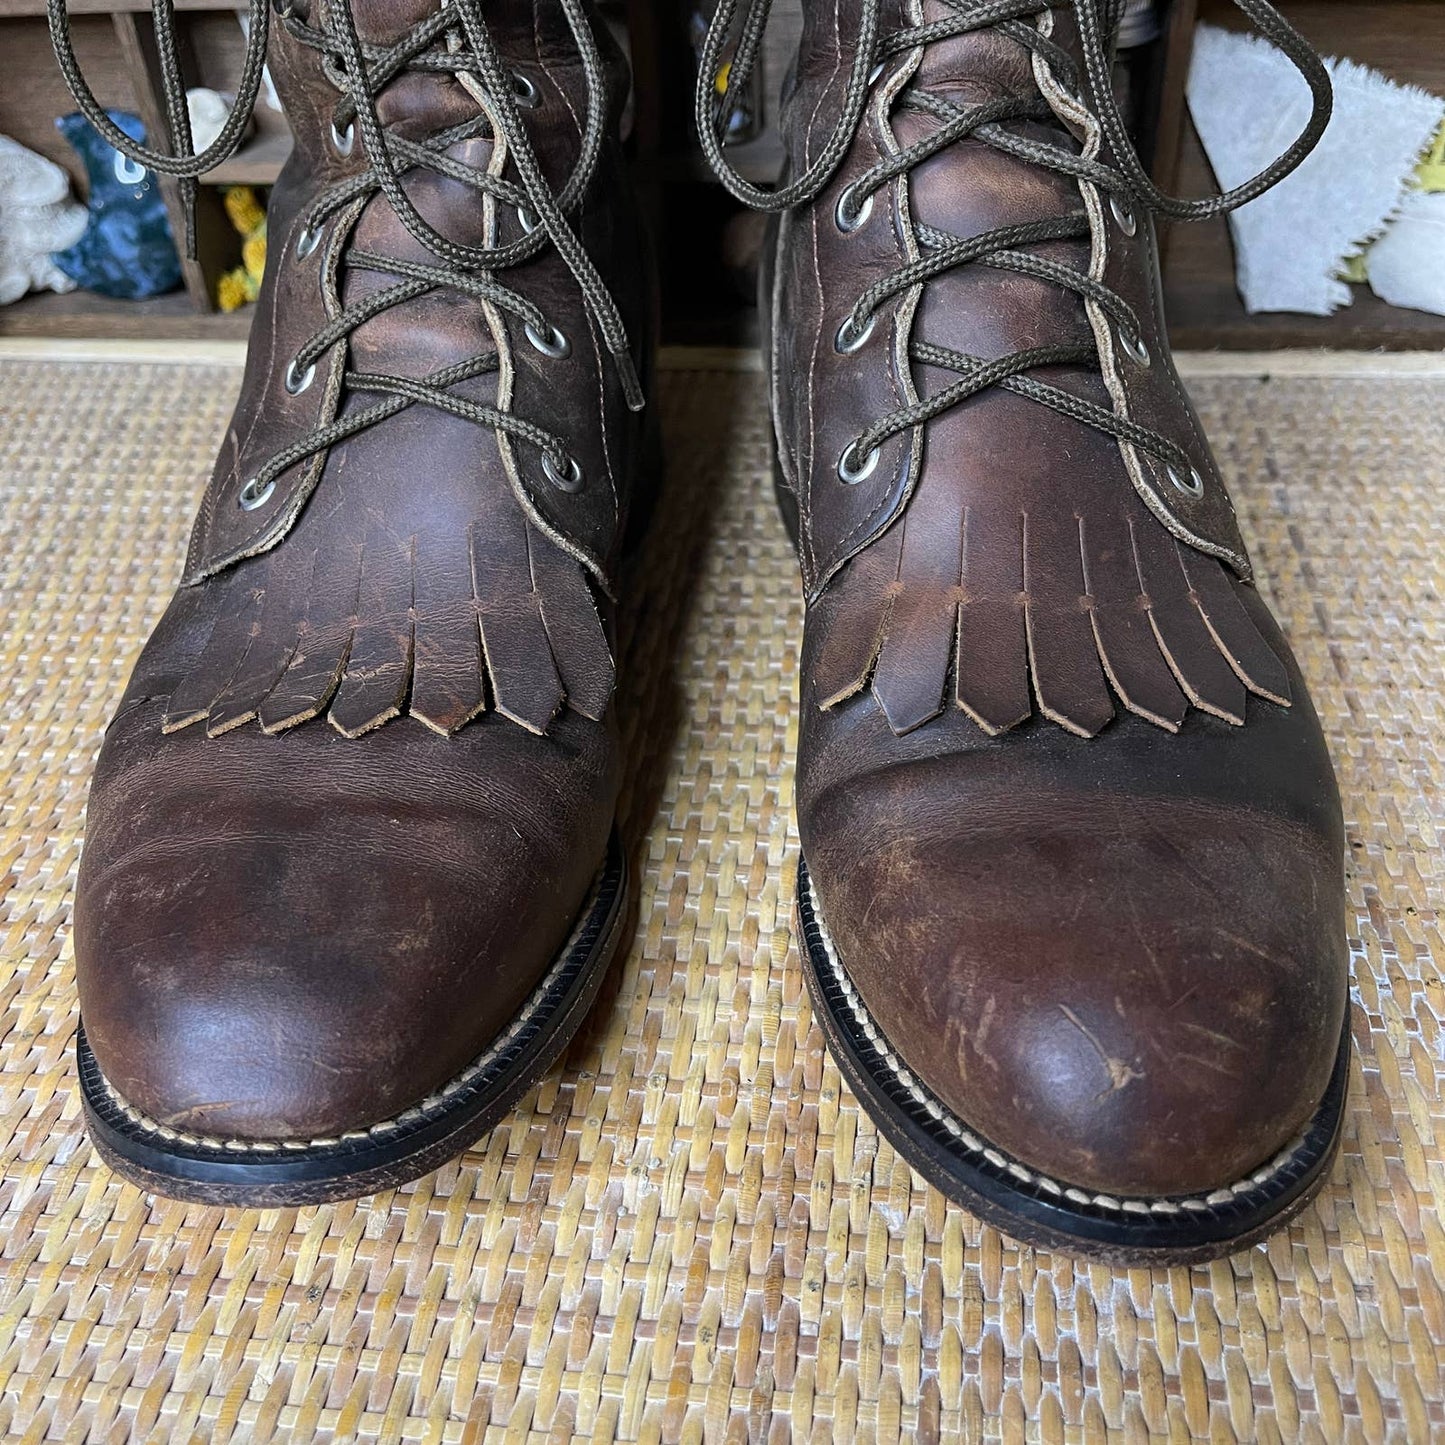 Vintage 90s Brown Leather Lace up Roper Boots by Tony Lama Size 11